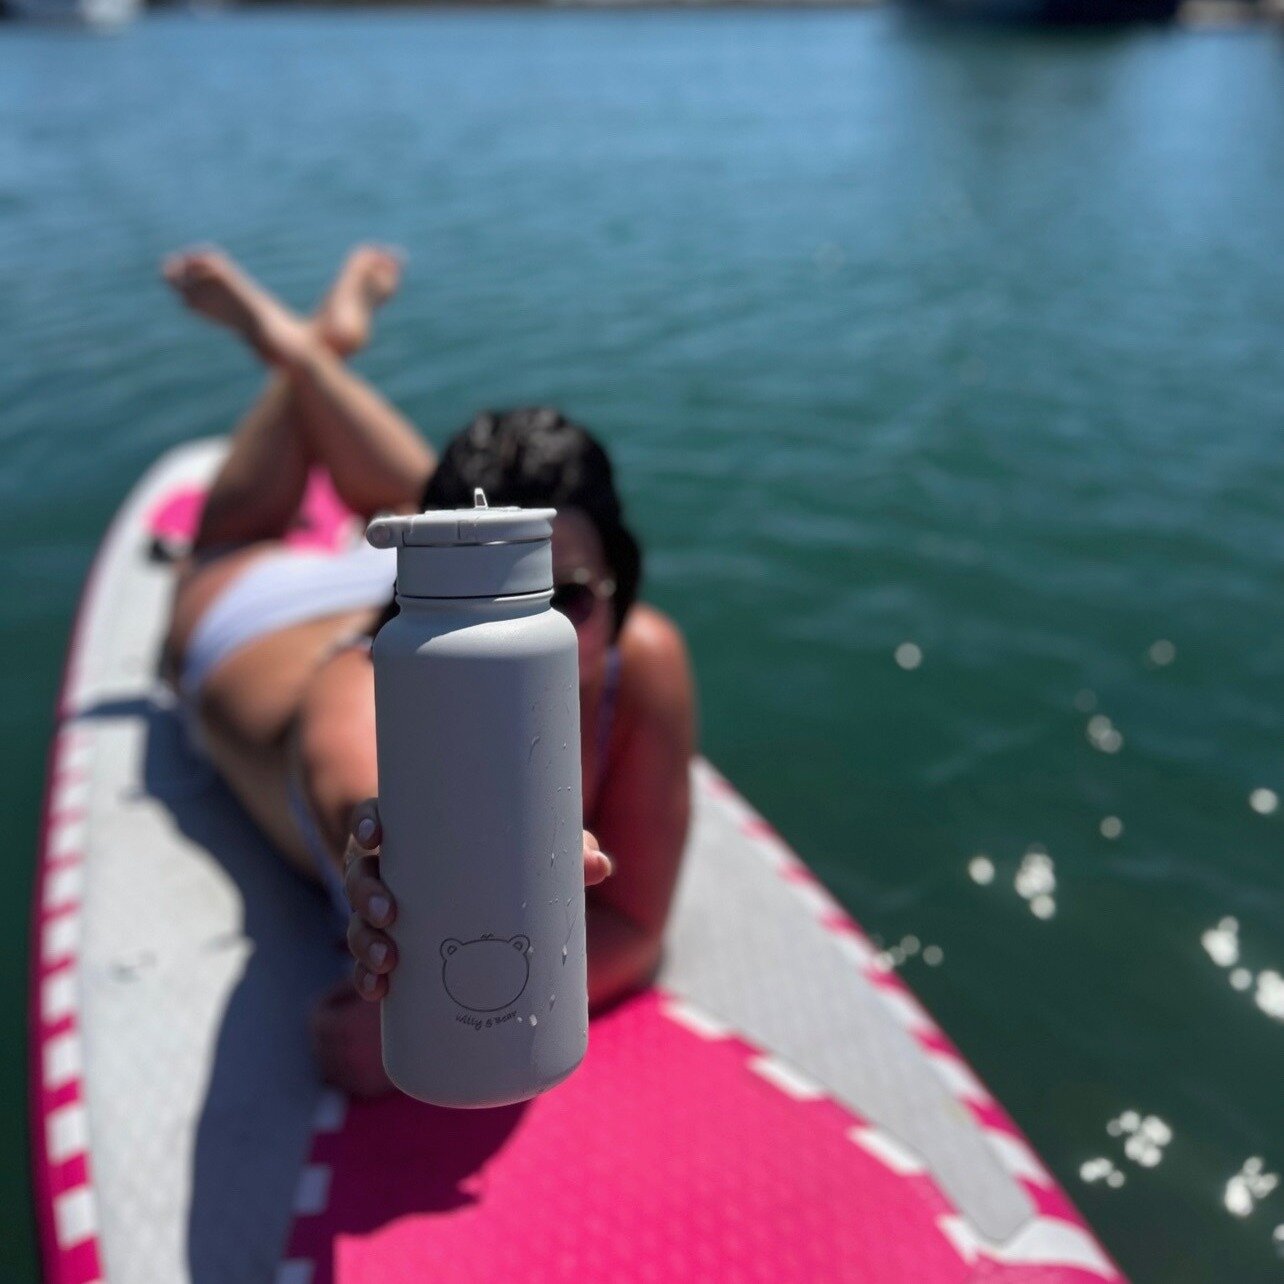 What&rsquo;s better than a day on the water? A super hydrated day on the water! Our limited edition Willy and Bear Bottles will keep your water cold for 12+ hours, even in the hot sun. ☀️

Shop this must have bottle for the warmer season through the 